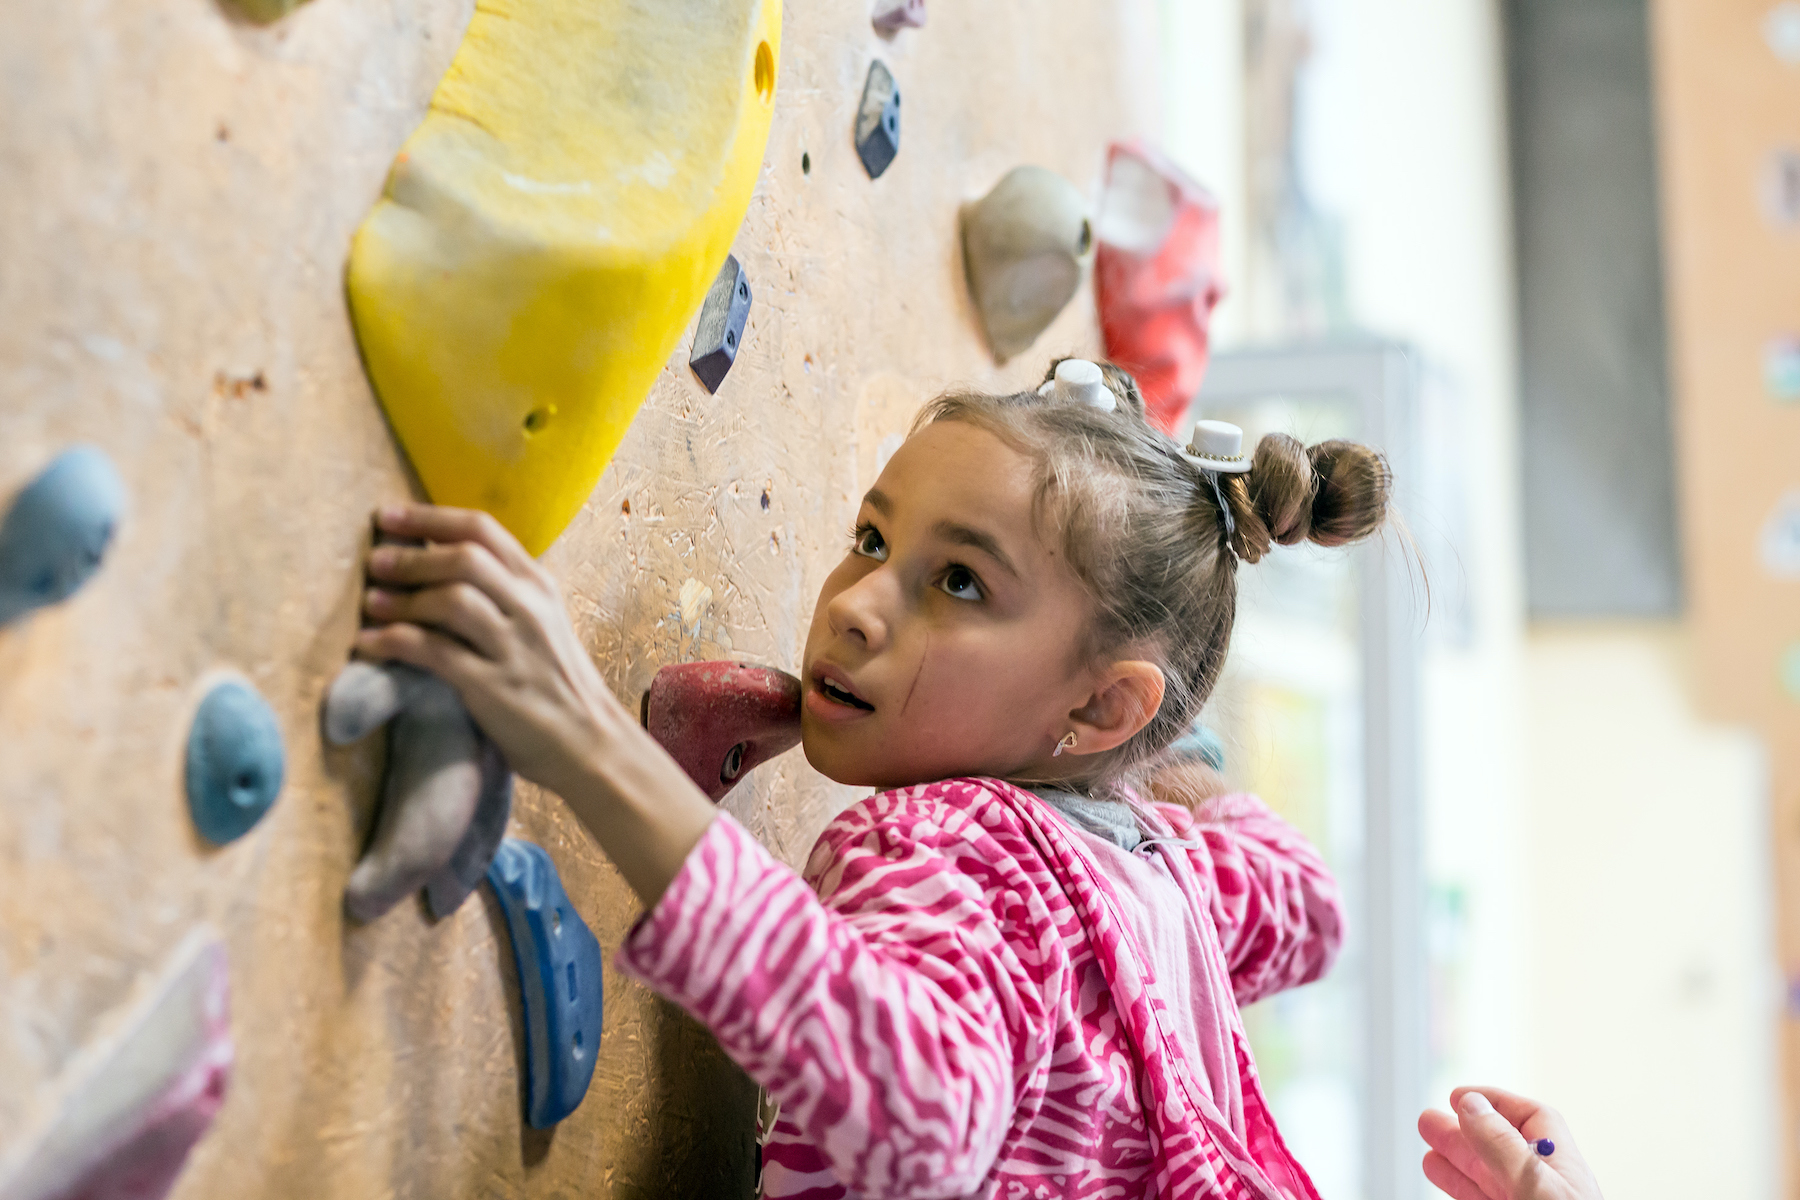 Junior Climber Girl shirt hanging on holds on climbing wall of indoor gym